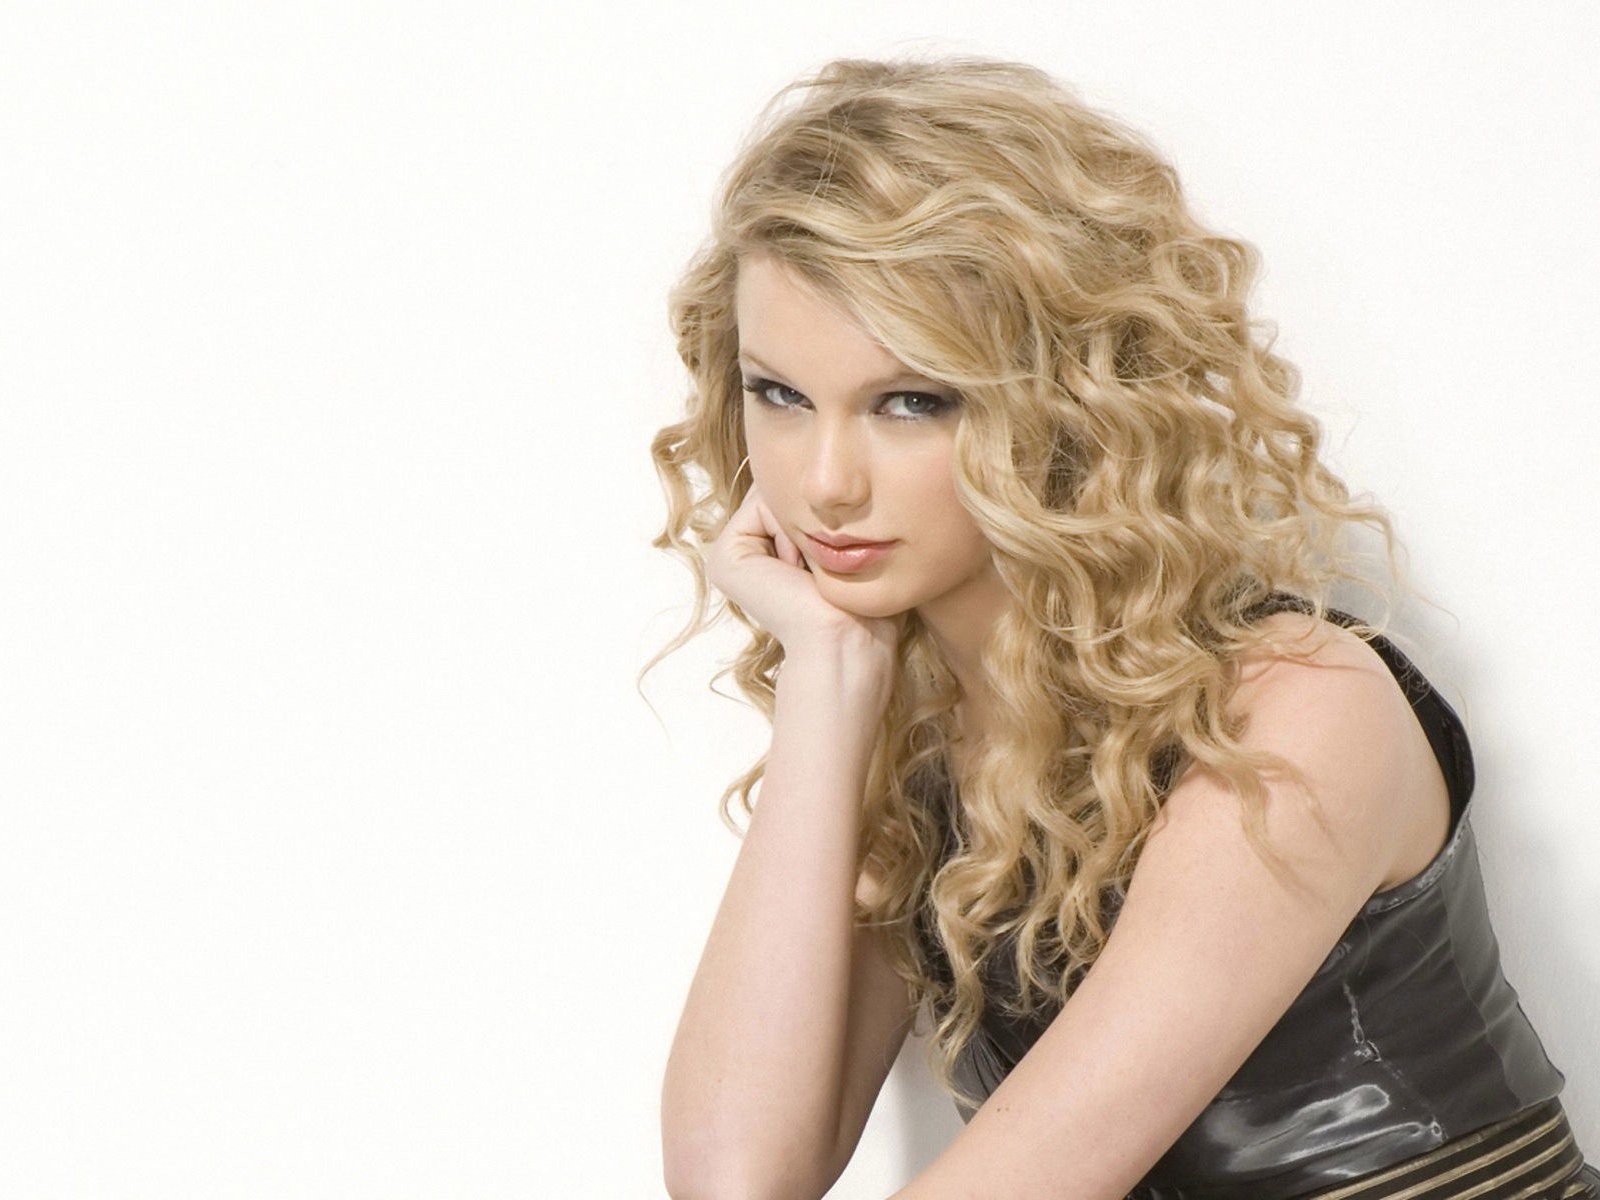 Wallpaper New Movies For Pc Taylor Swift HD